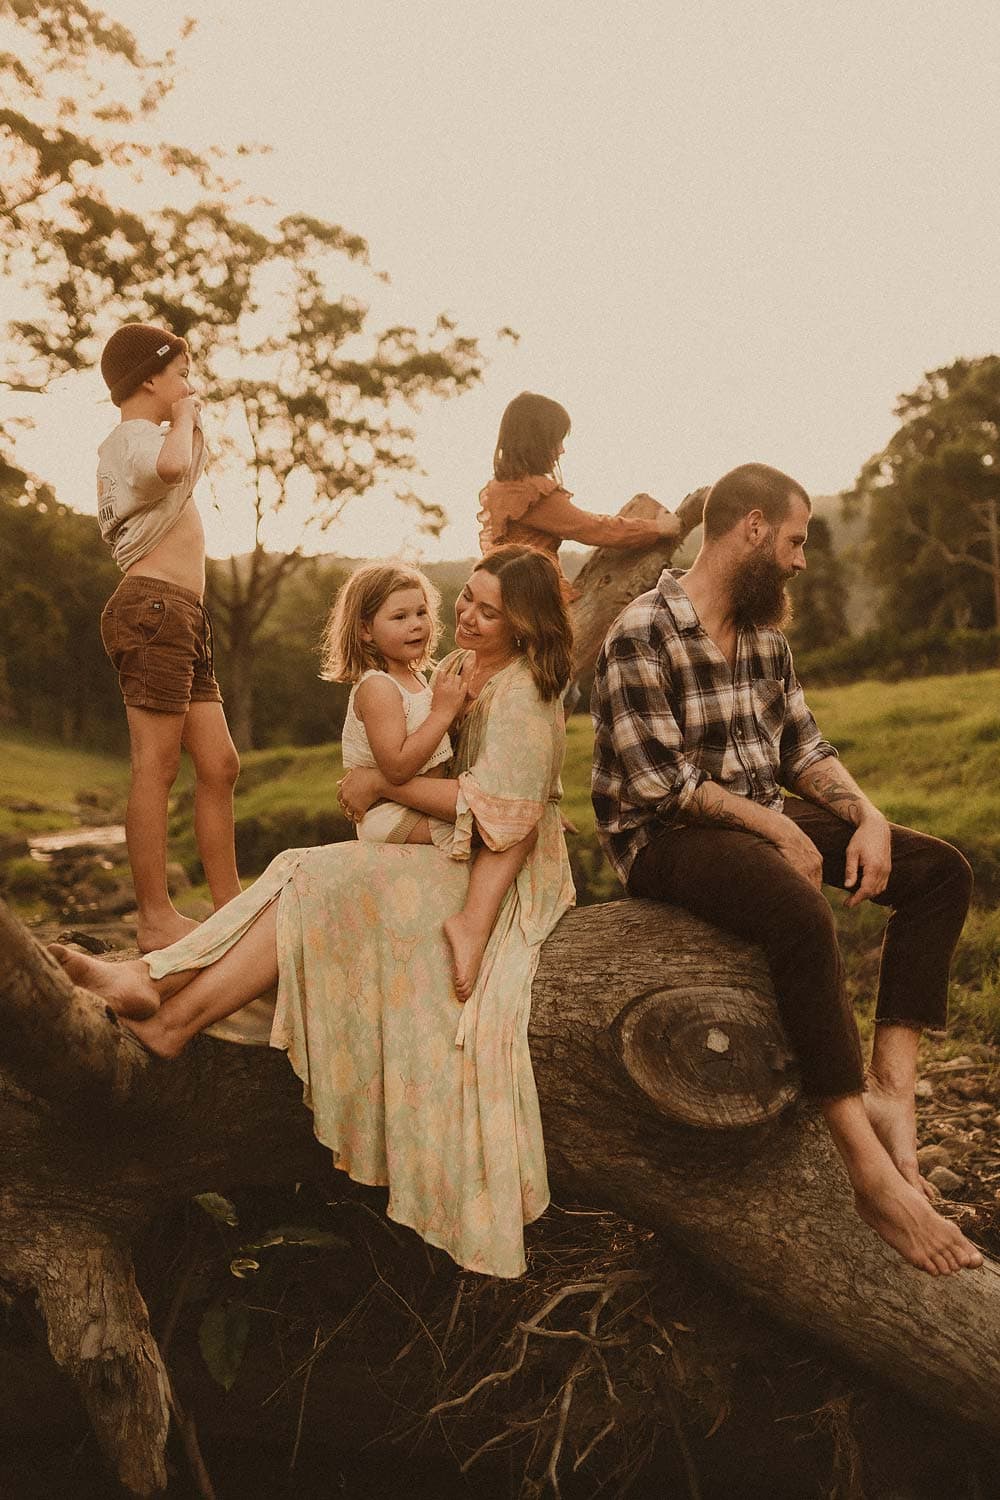 Sutherland-shire-family-photographer-family-on-fallen-tree-with-mum-and-daughter-sharing-moment-as-older-siblings-explore-and-play